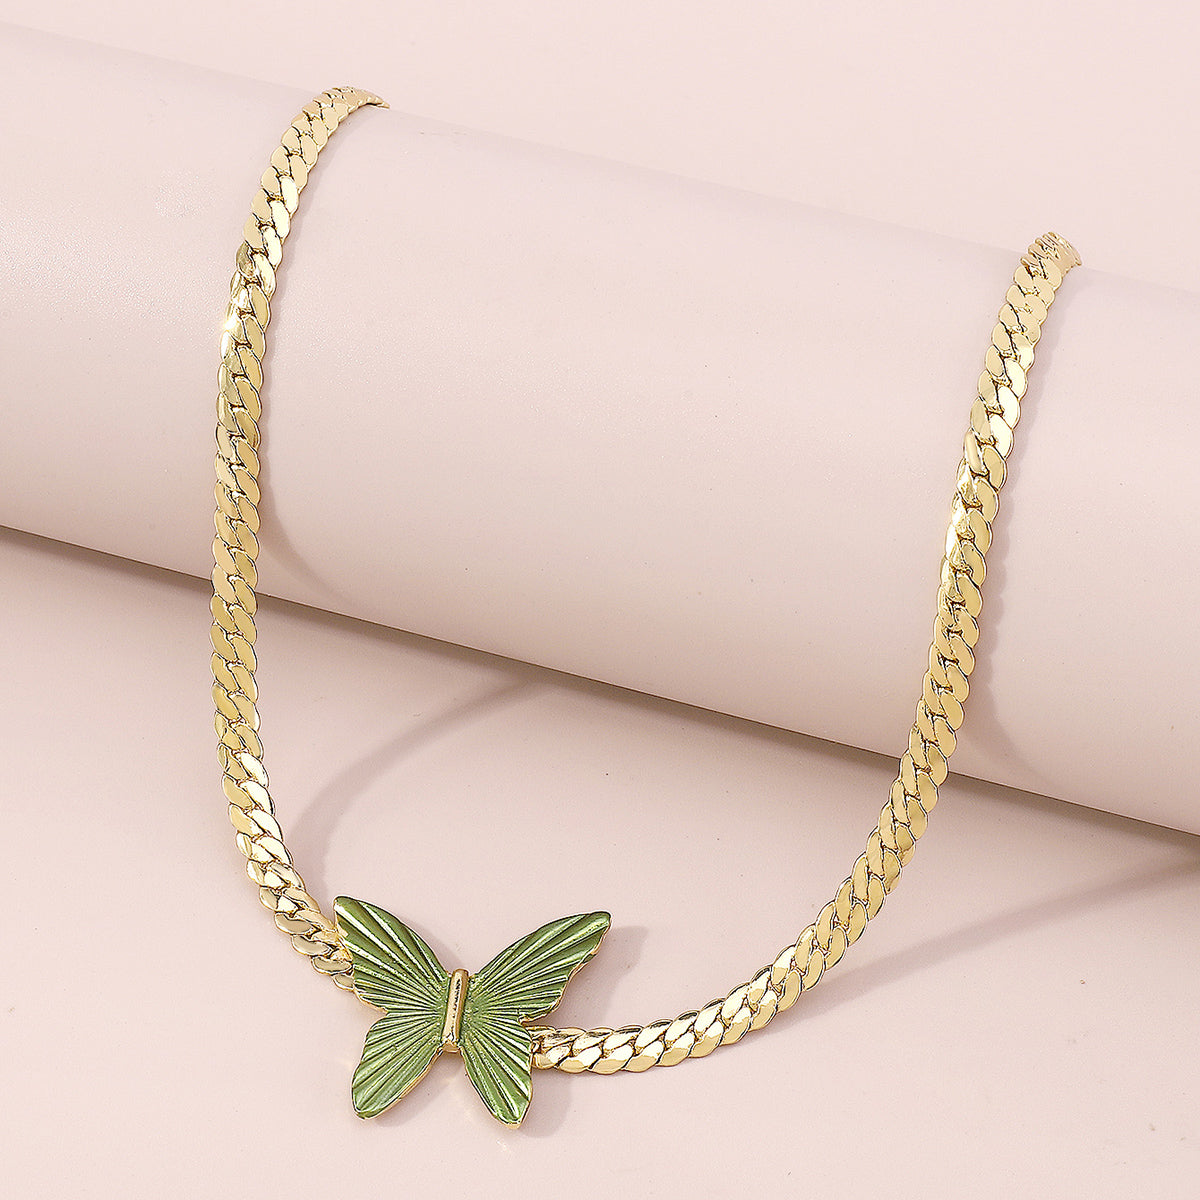 Punk Cuban Link Chain Green Butterfly Necklace medyjewelry